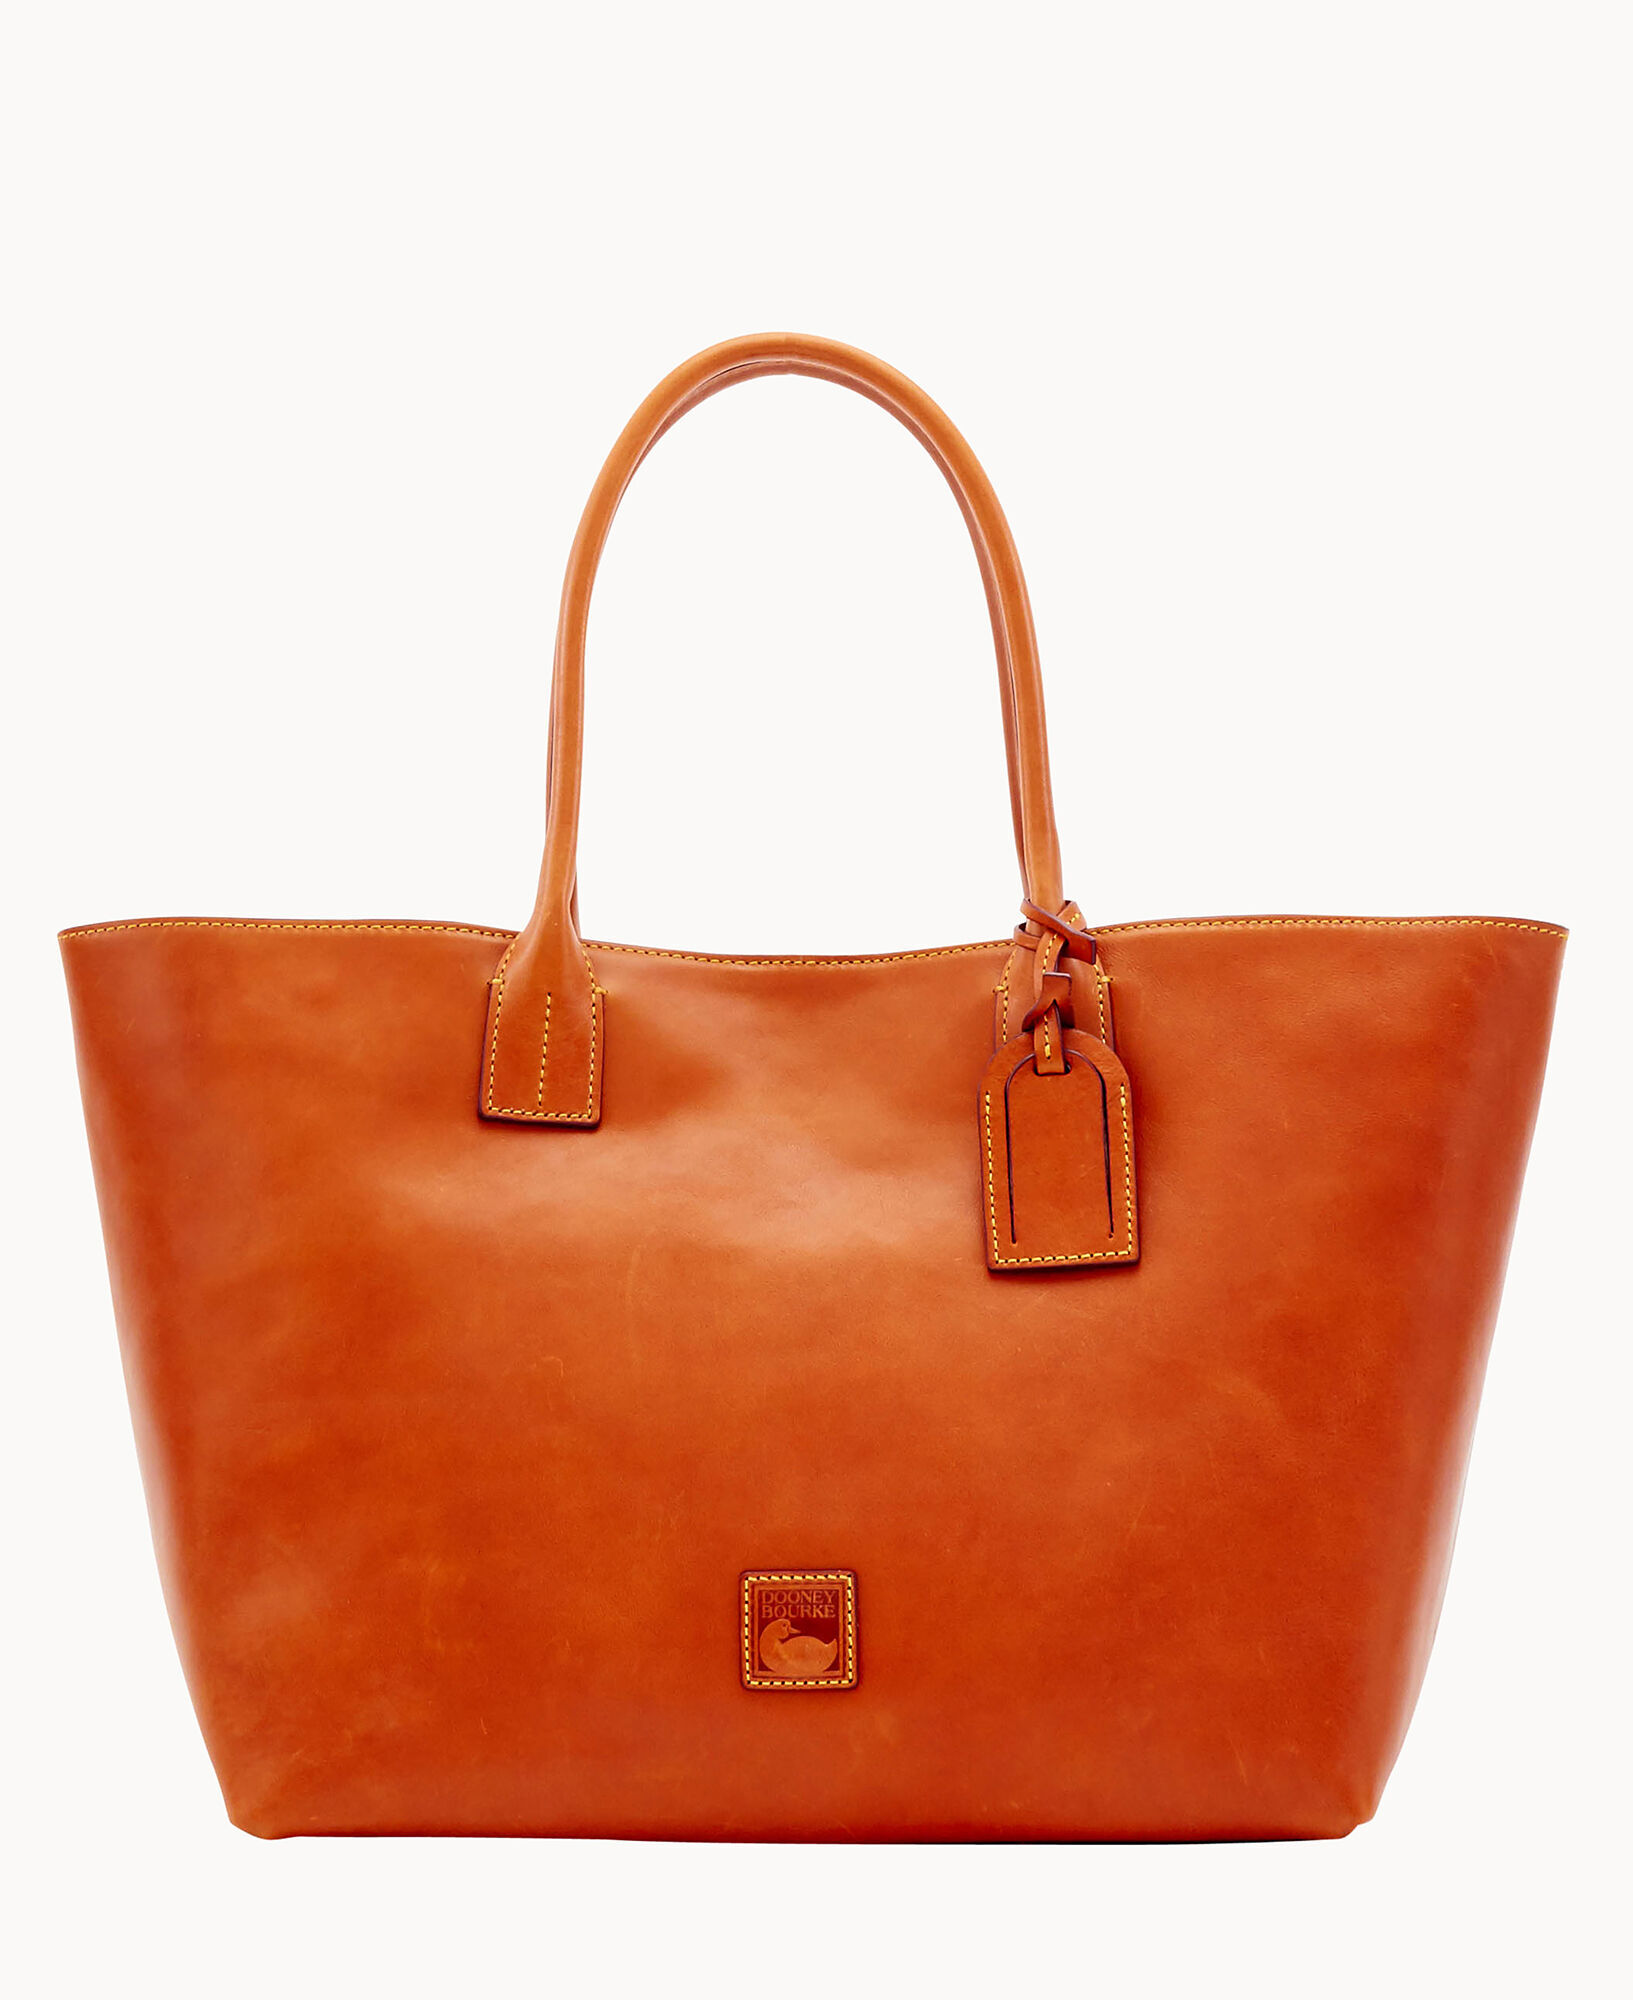 Bigger is better - The new Elle Tote Bag comes with a longer